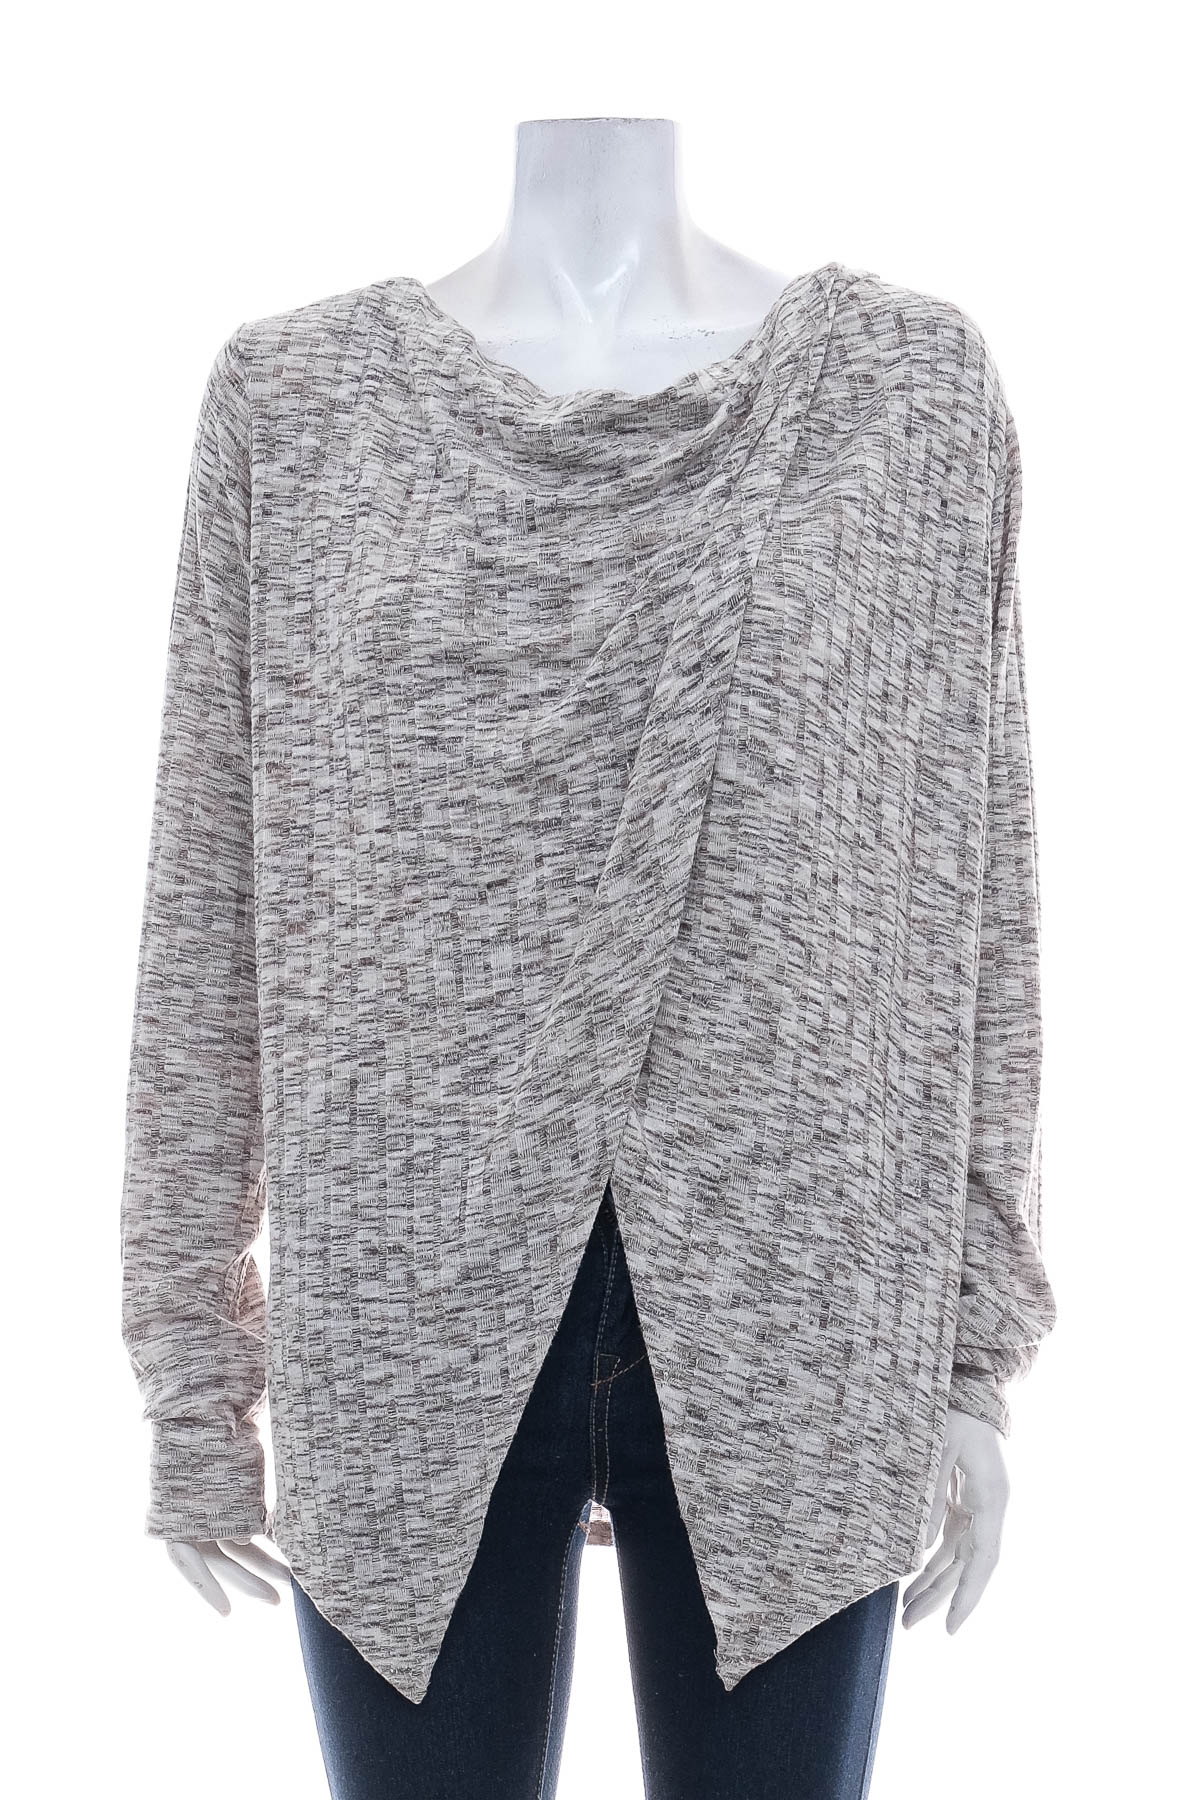 Women's sweater - Maurices - 0